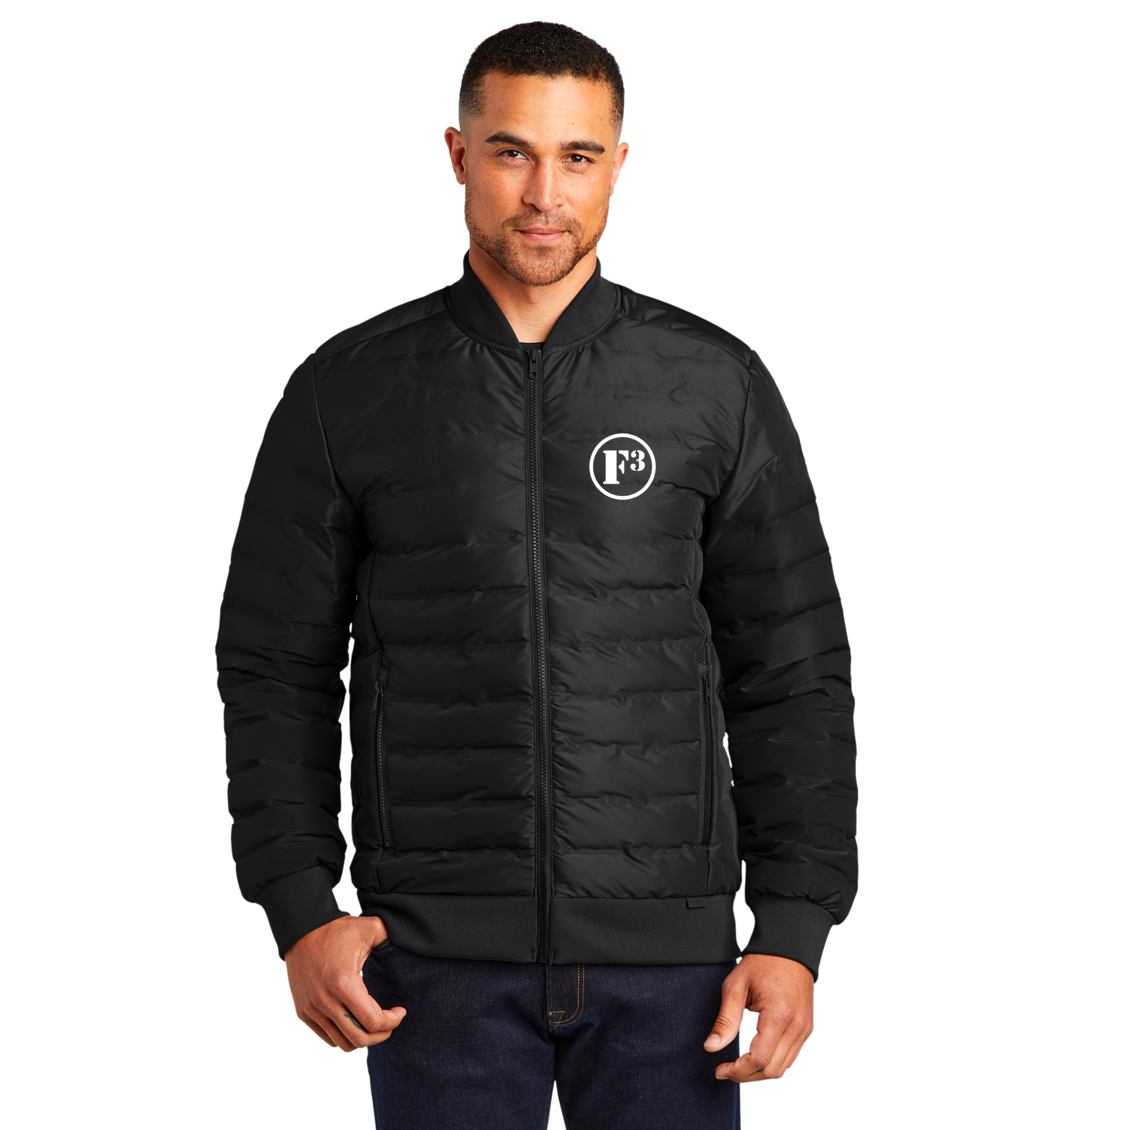 F3 OGIO Street Puffy Full-Zip Jacket - Made to Order